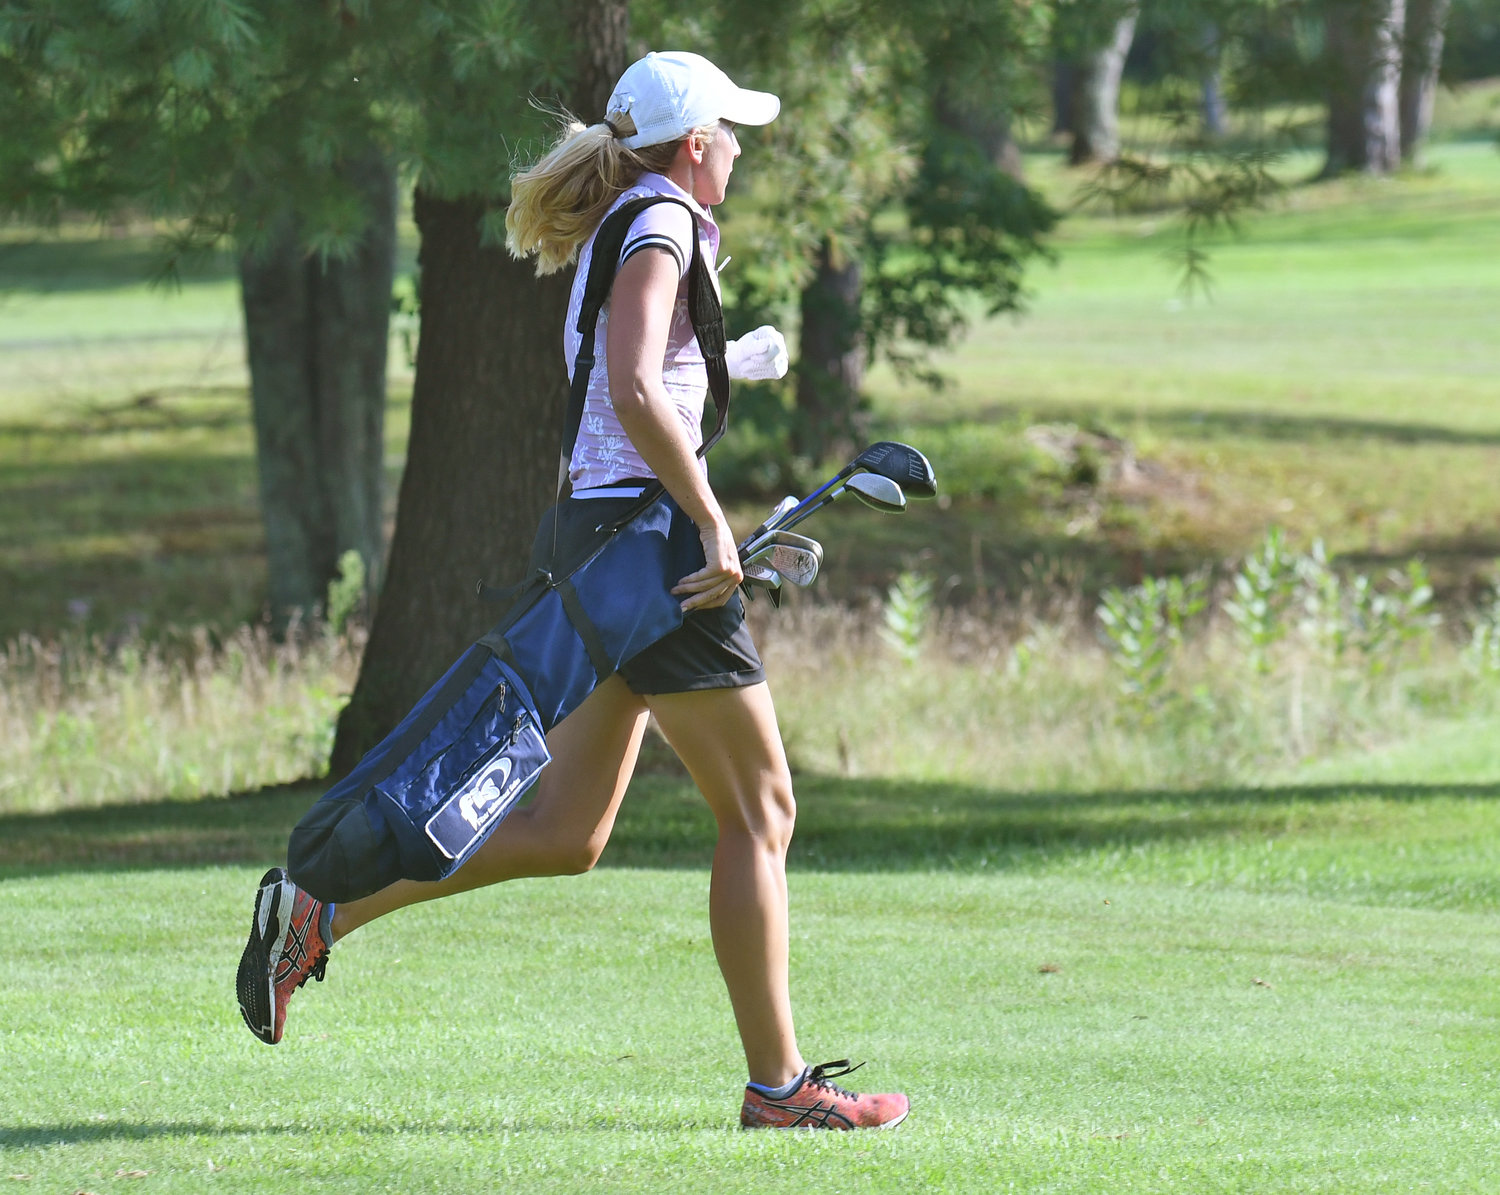 Top-ranked women’s speedgolfer Lauren Cupp runs up the ninth fairway at Rome Country Club on Monday morning during the New York Speedgolf Open.